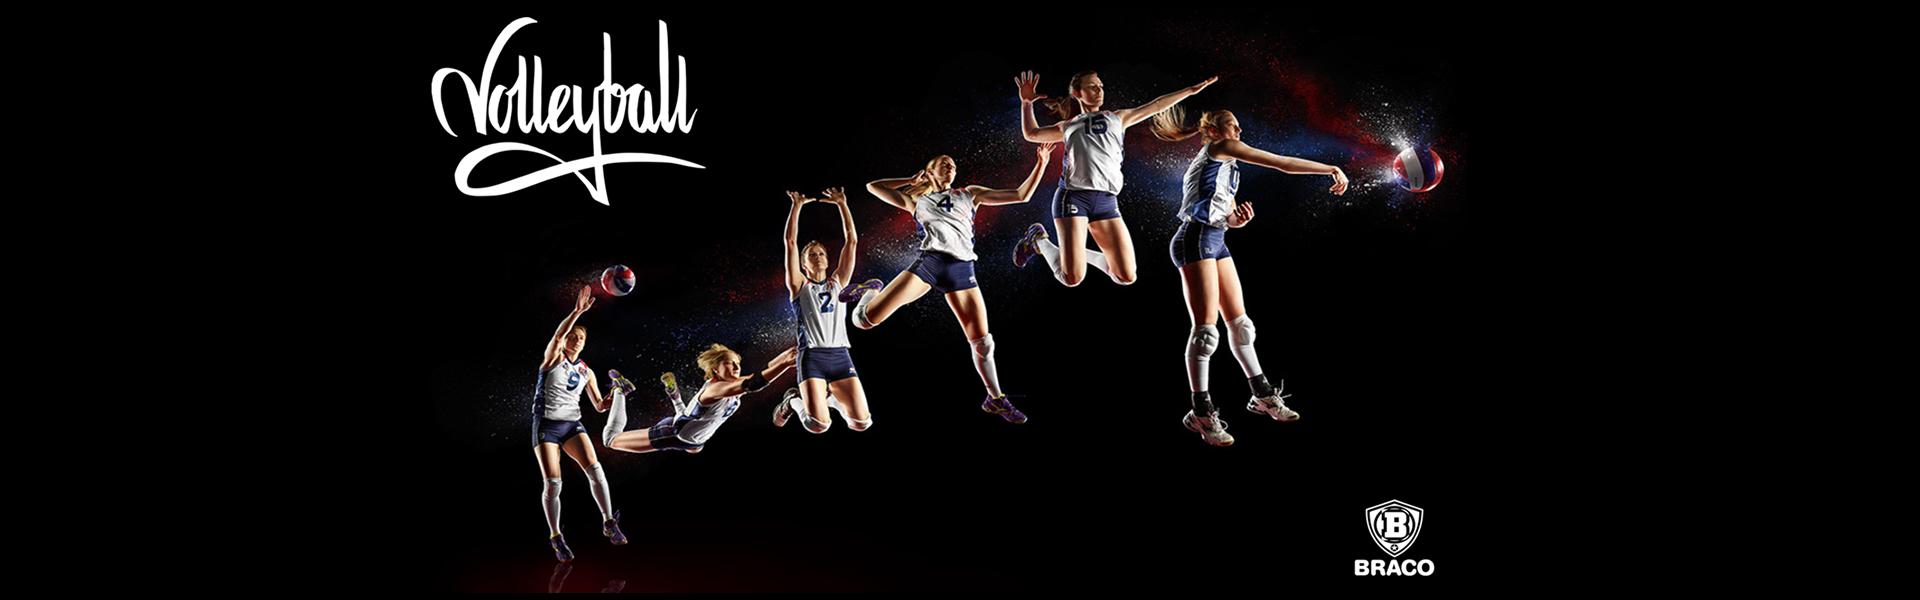 BANNER-VOLLEY-site1